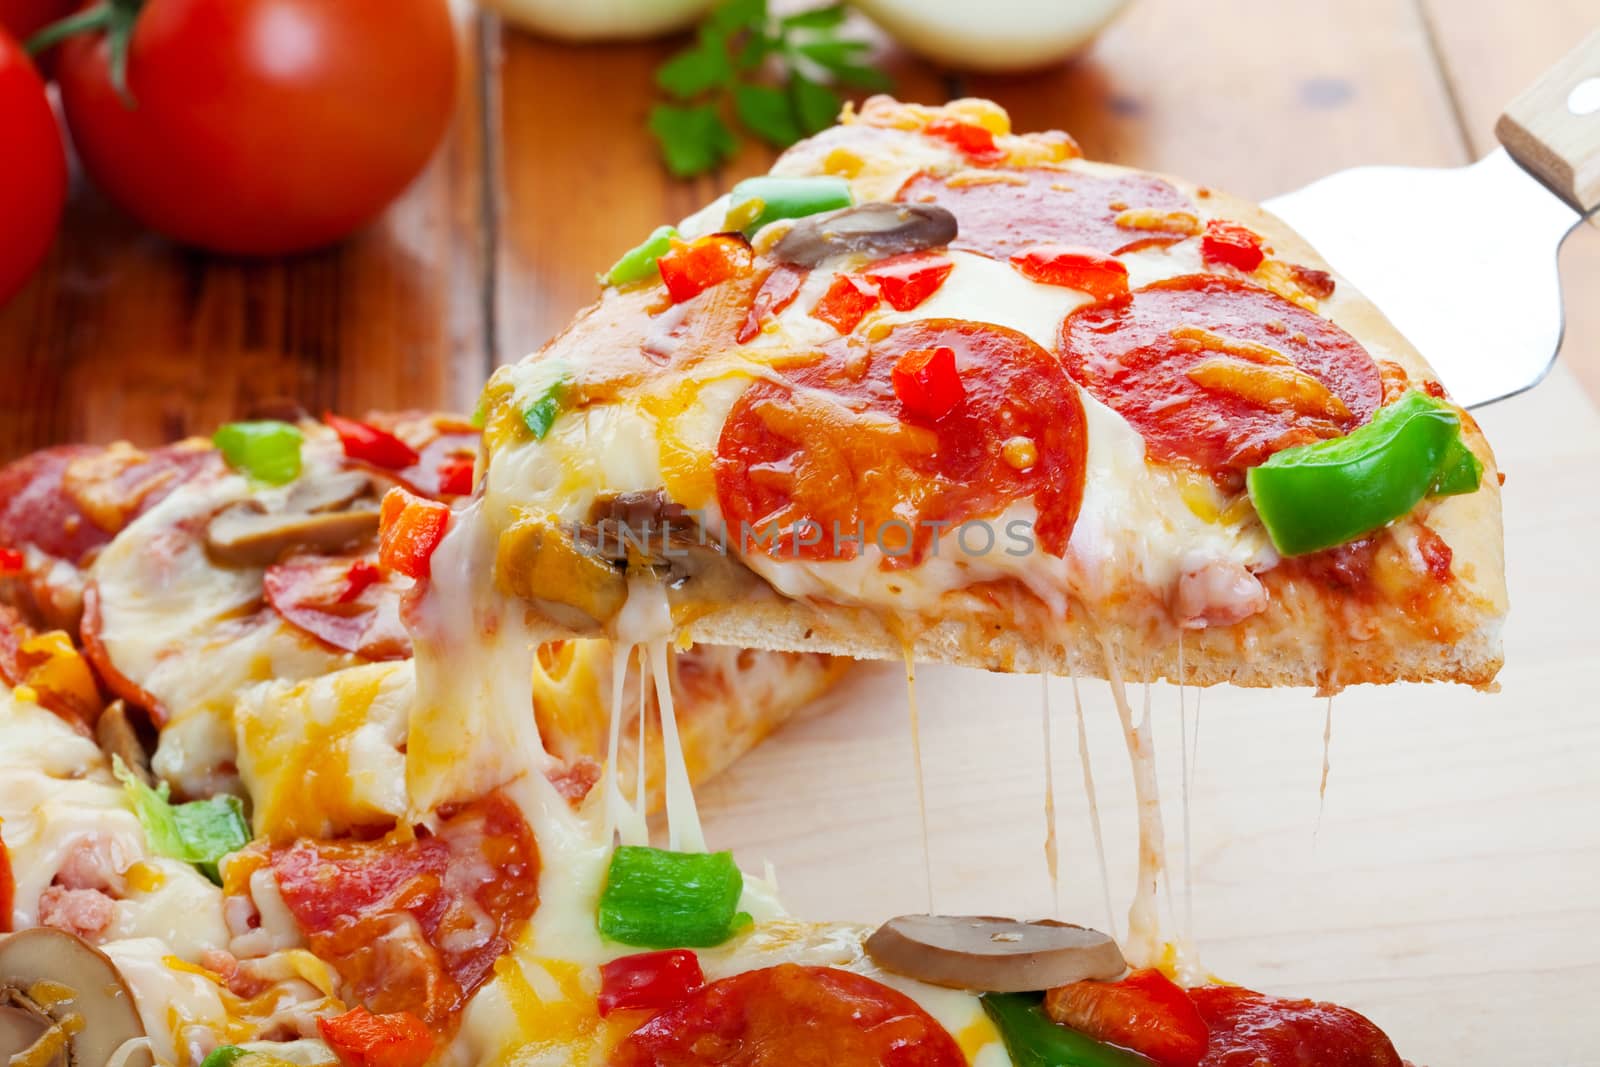 A slice of hot pizza deluxe with pepperoni, mushrooms, peppers, & lots of gooey mozzarella cheese, ready to be served.